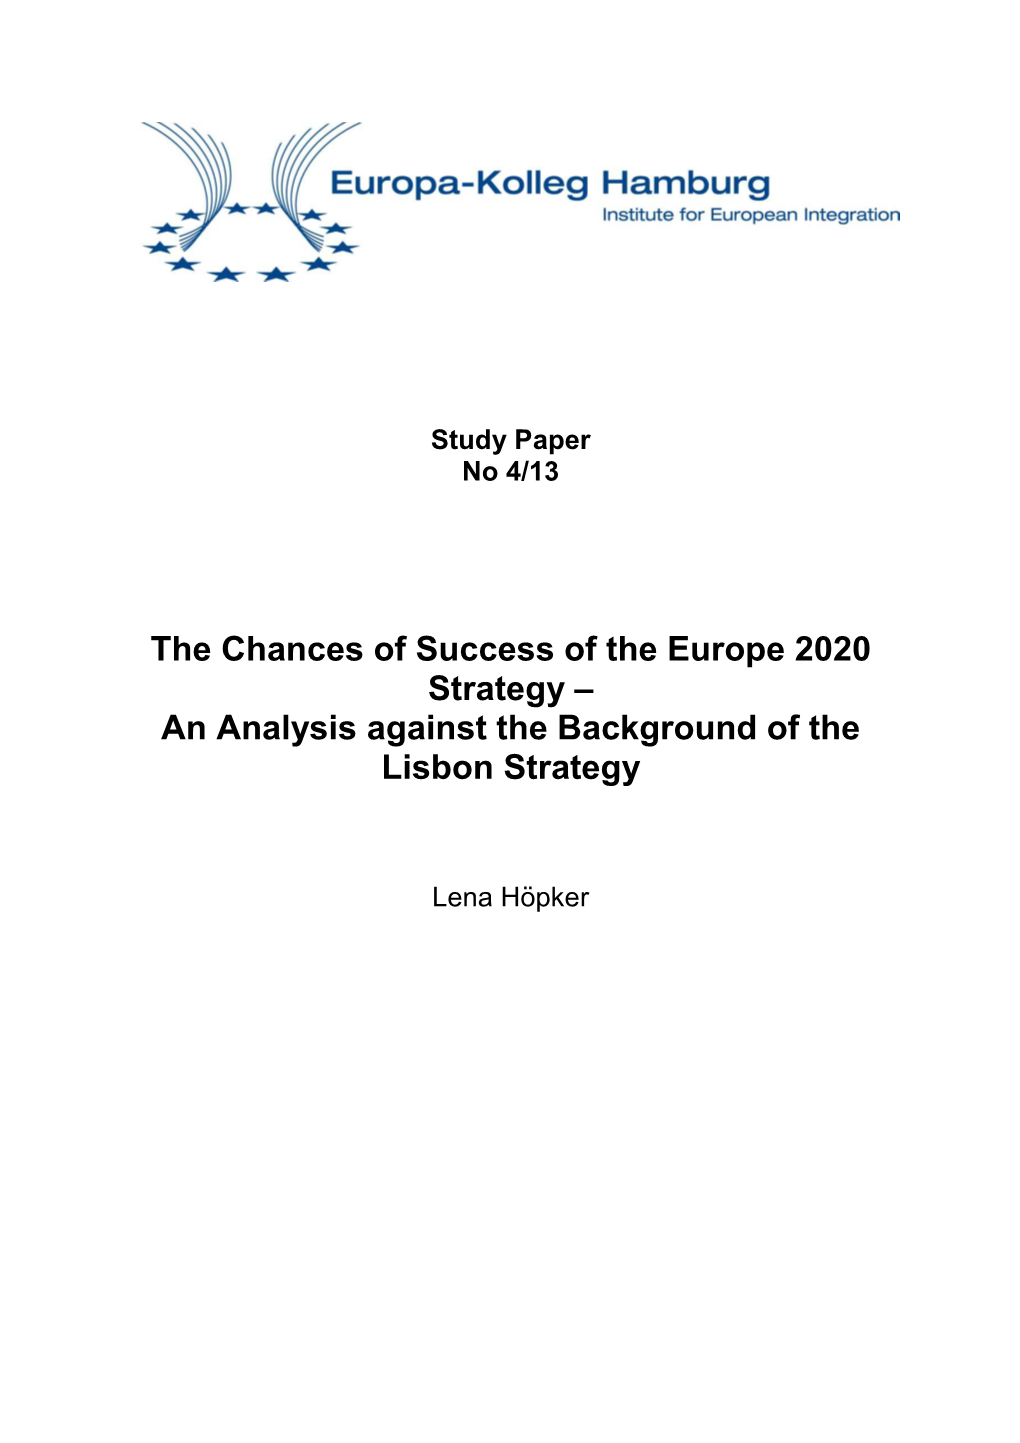 The Chances of Success of the Europe 2020 Strategy – an Analysis Against the Background of the Lisbon Strategy